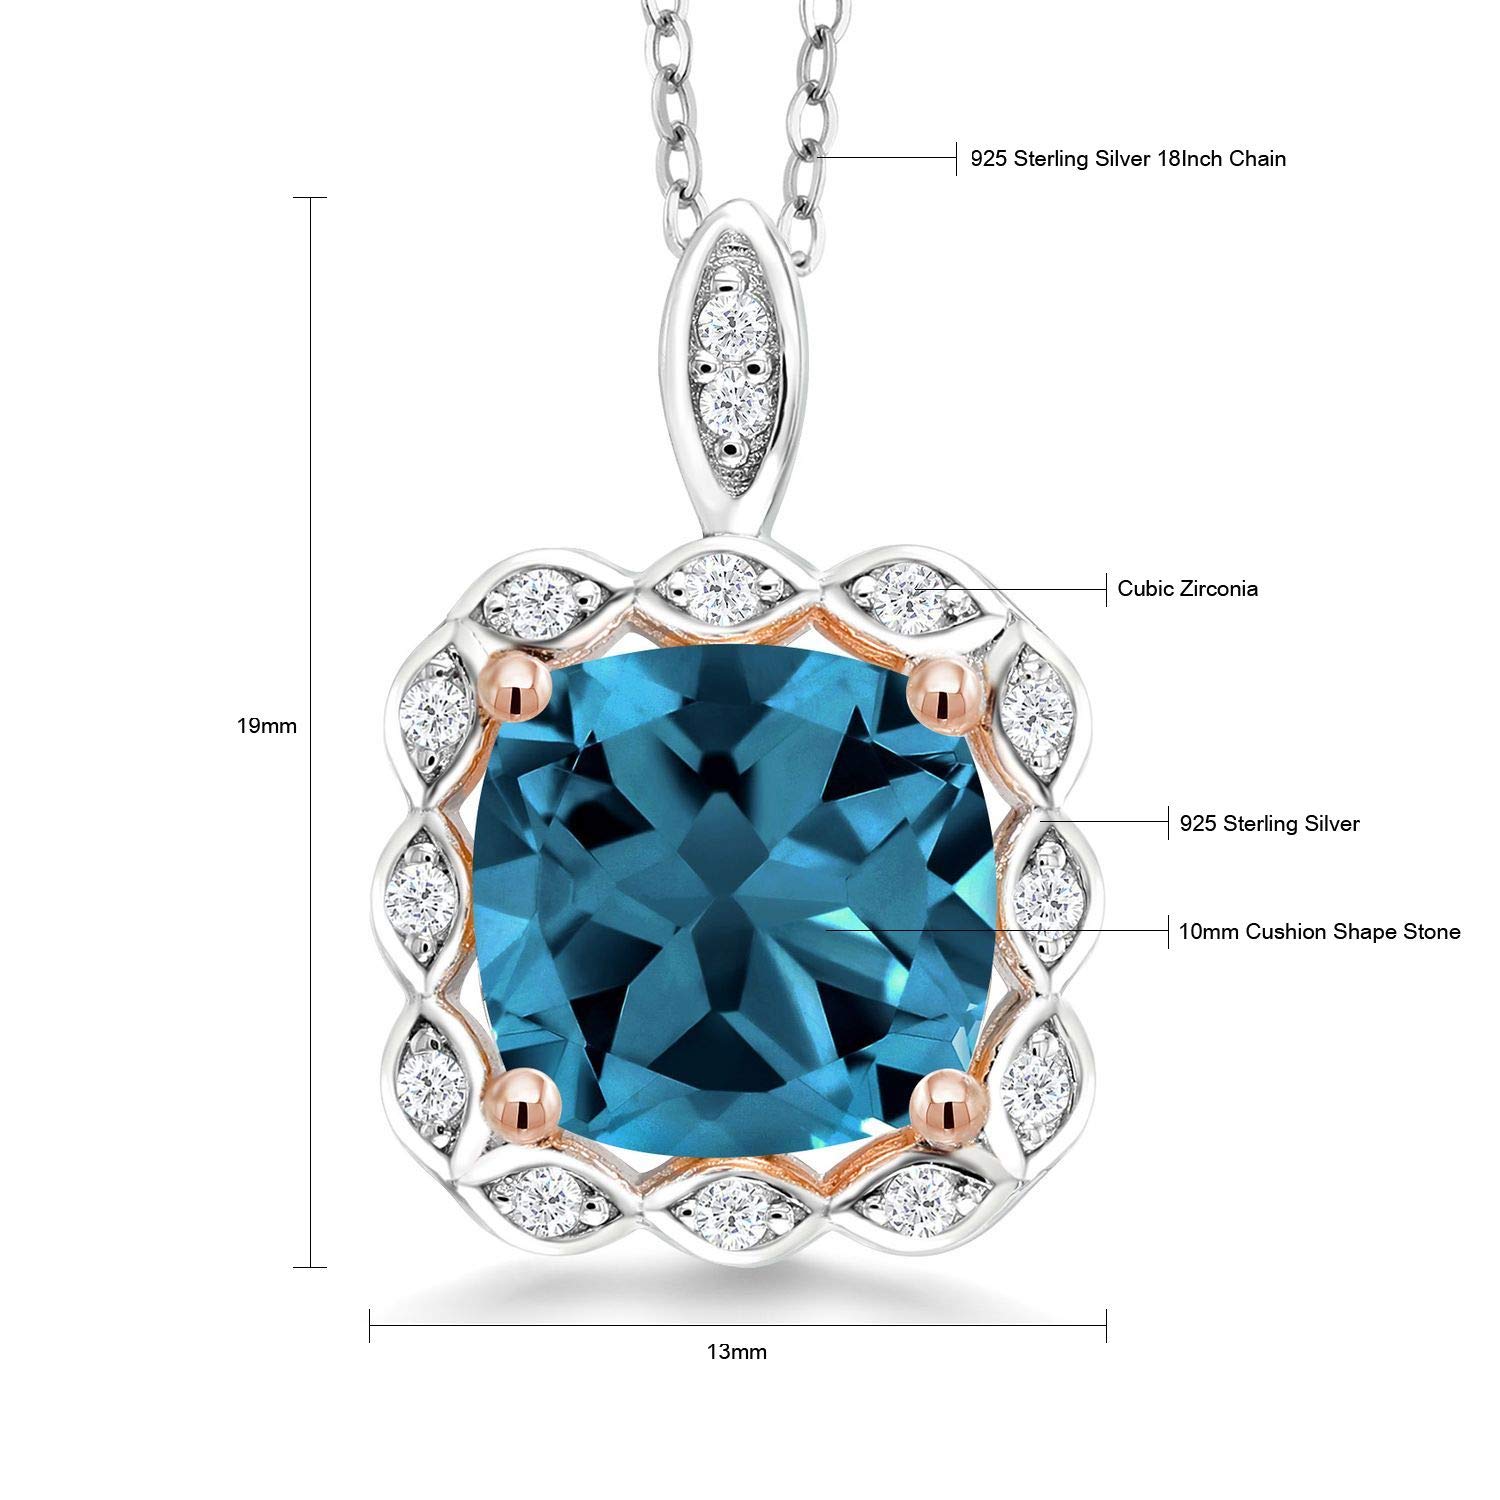 Gem Stone King 925 2 Tone Sterling Silver London Blue Topaz Pendant Necklace For Women (5.37 Cttw, Gemstone Birthstone, with 18 Inch Chain)